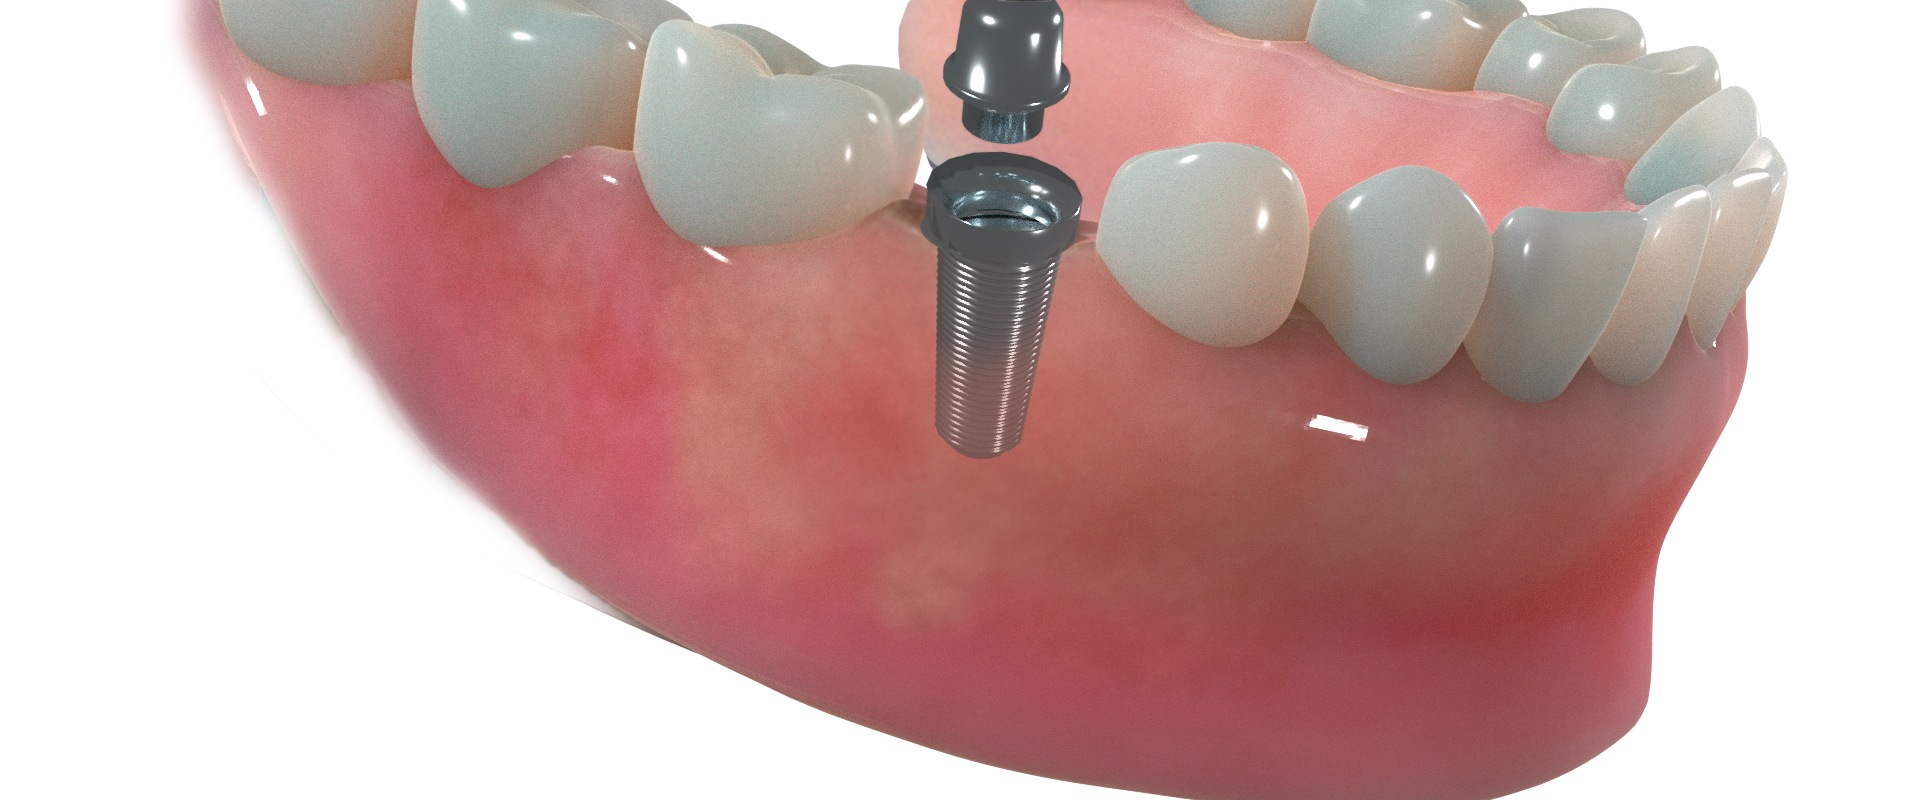 Revitalize Your Oral Health And Appearance With Dental Implants And Aesthetic Surgery In Austin, TX